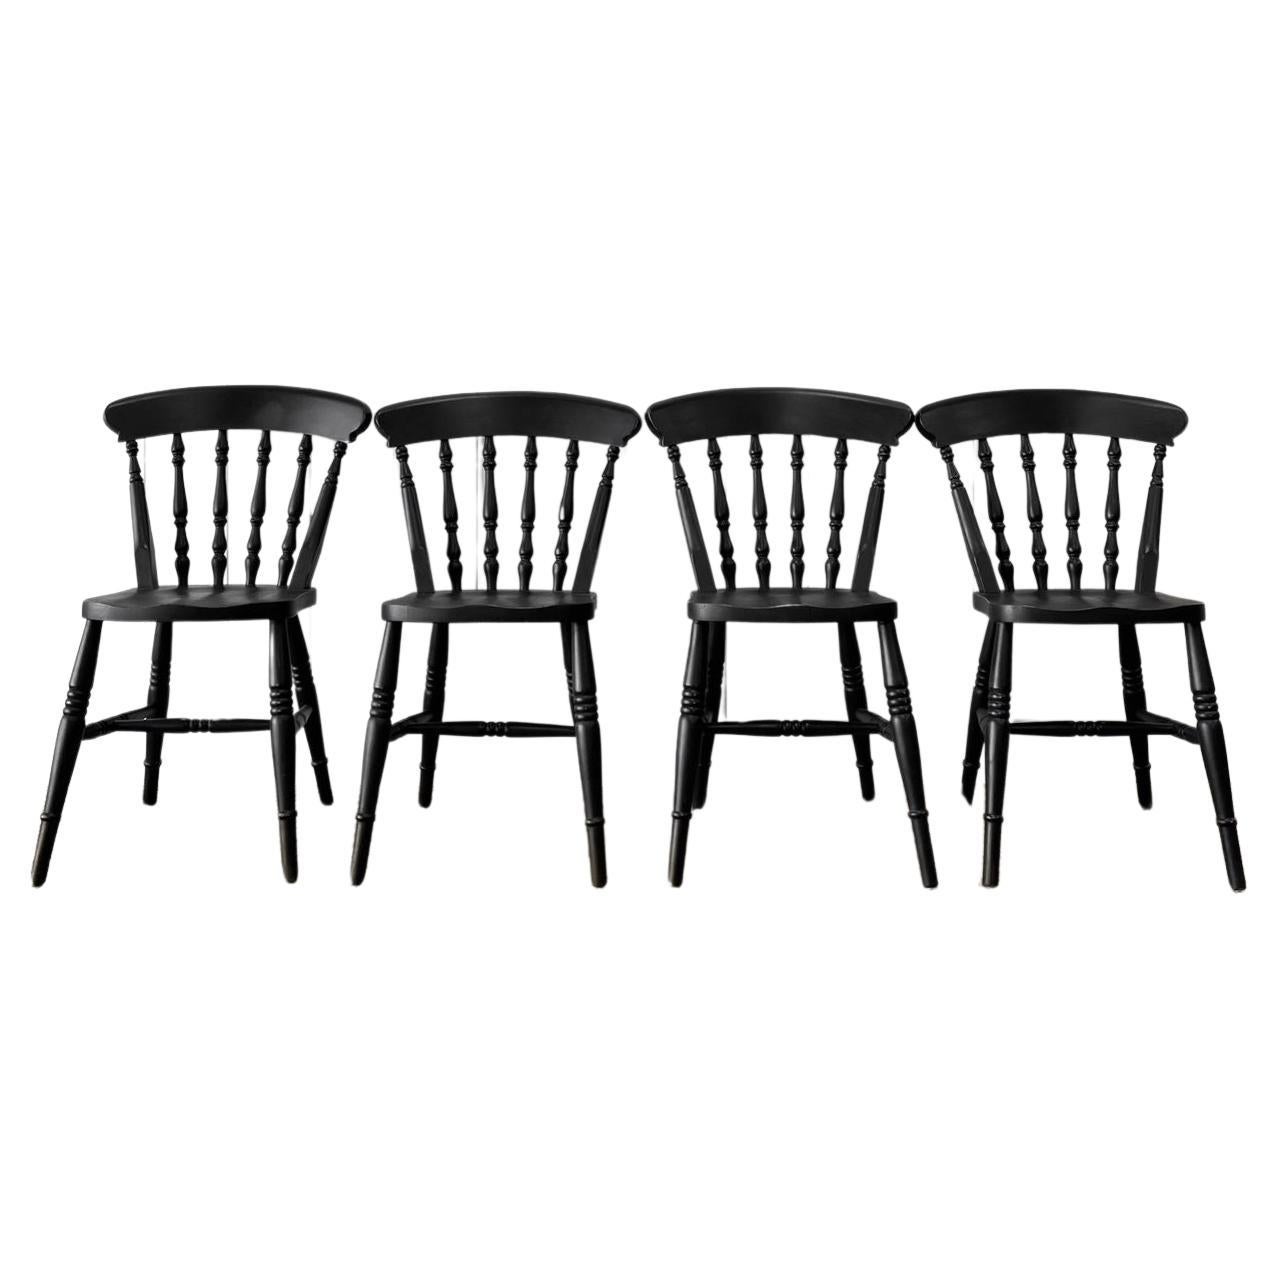 A Vintage Set of 4 Spindle Back Chairs For Sale